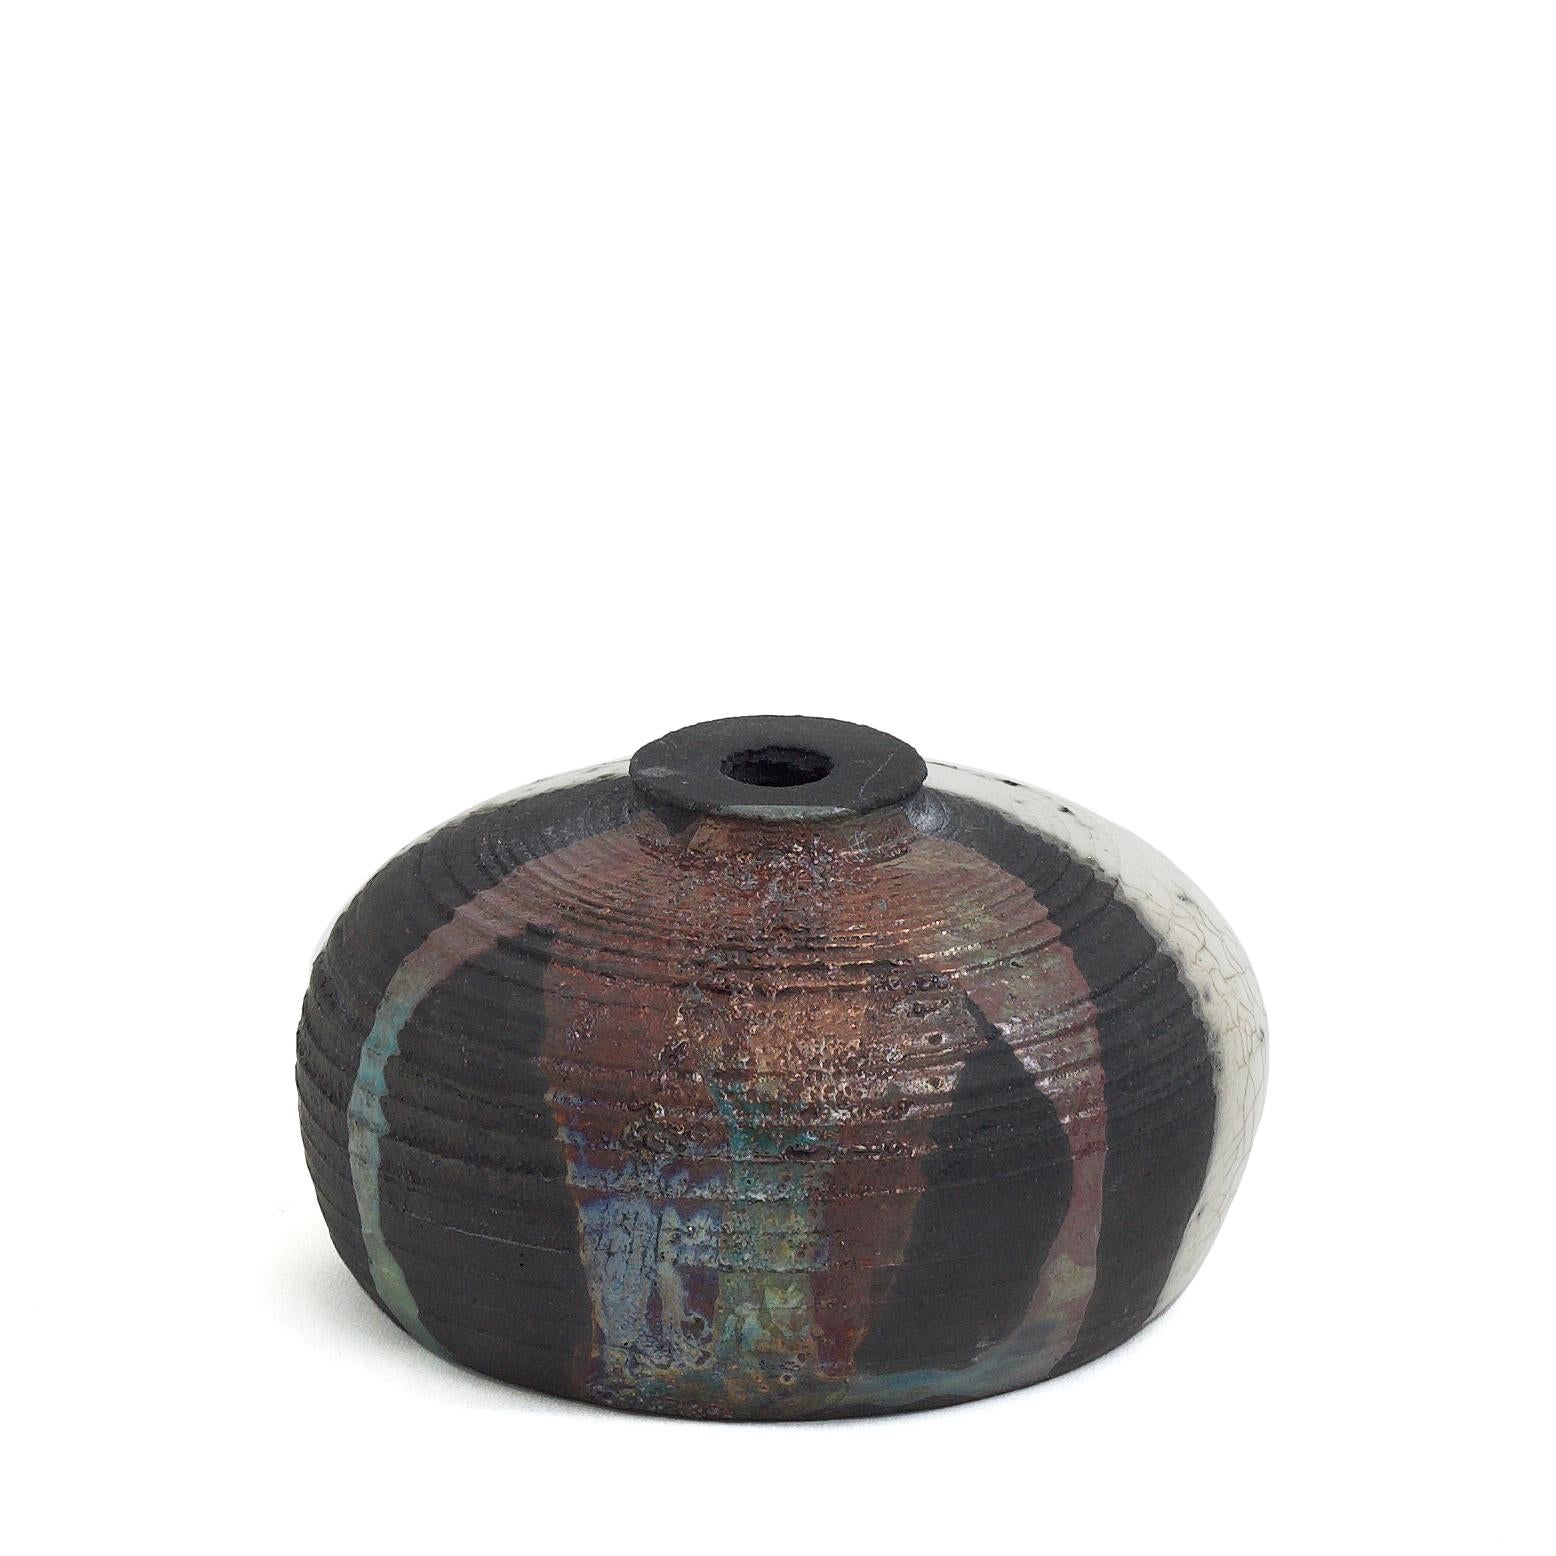 Nauru sculpture

The copper details of this sculpture are able to show different colors thanks to the concentric lines present on the surface that expand and contract the space where the glaze would set, giving the metal the possibility to cool